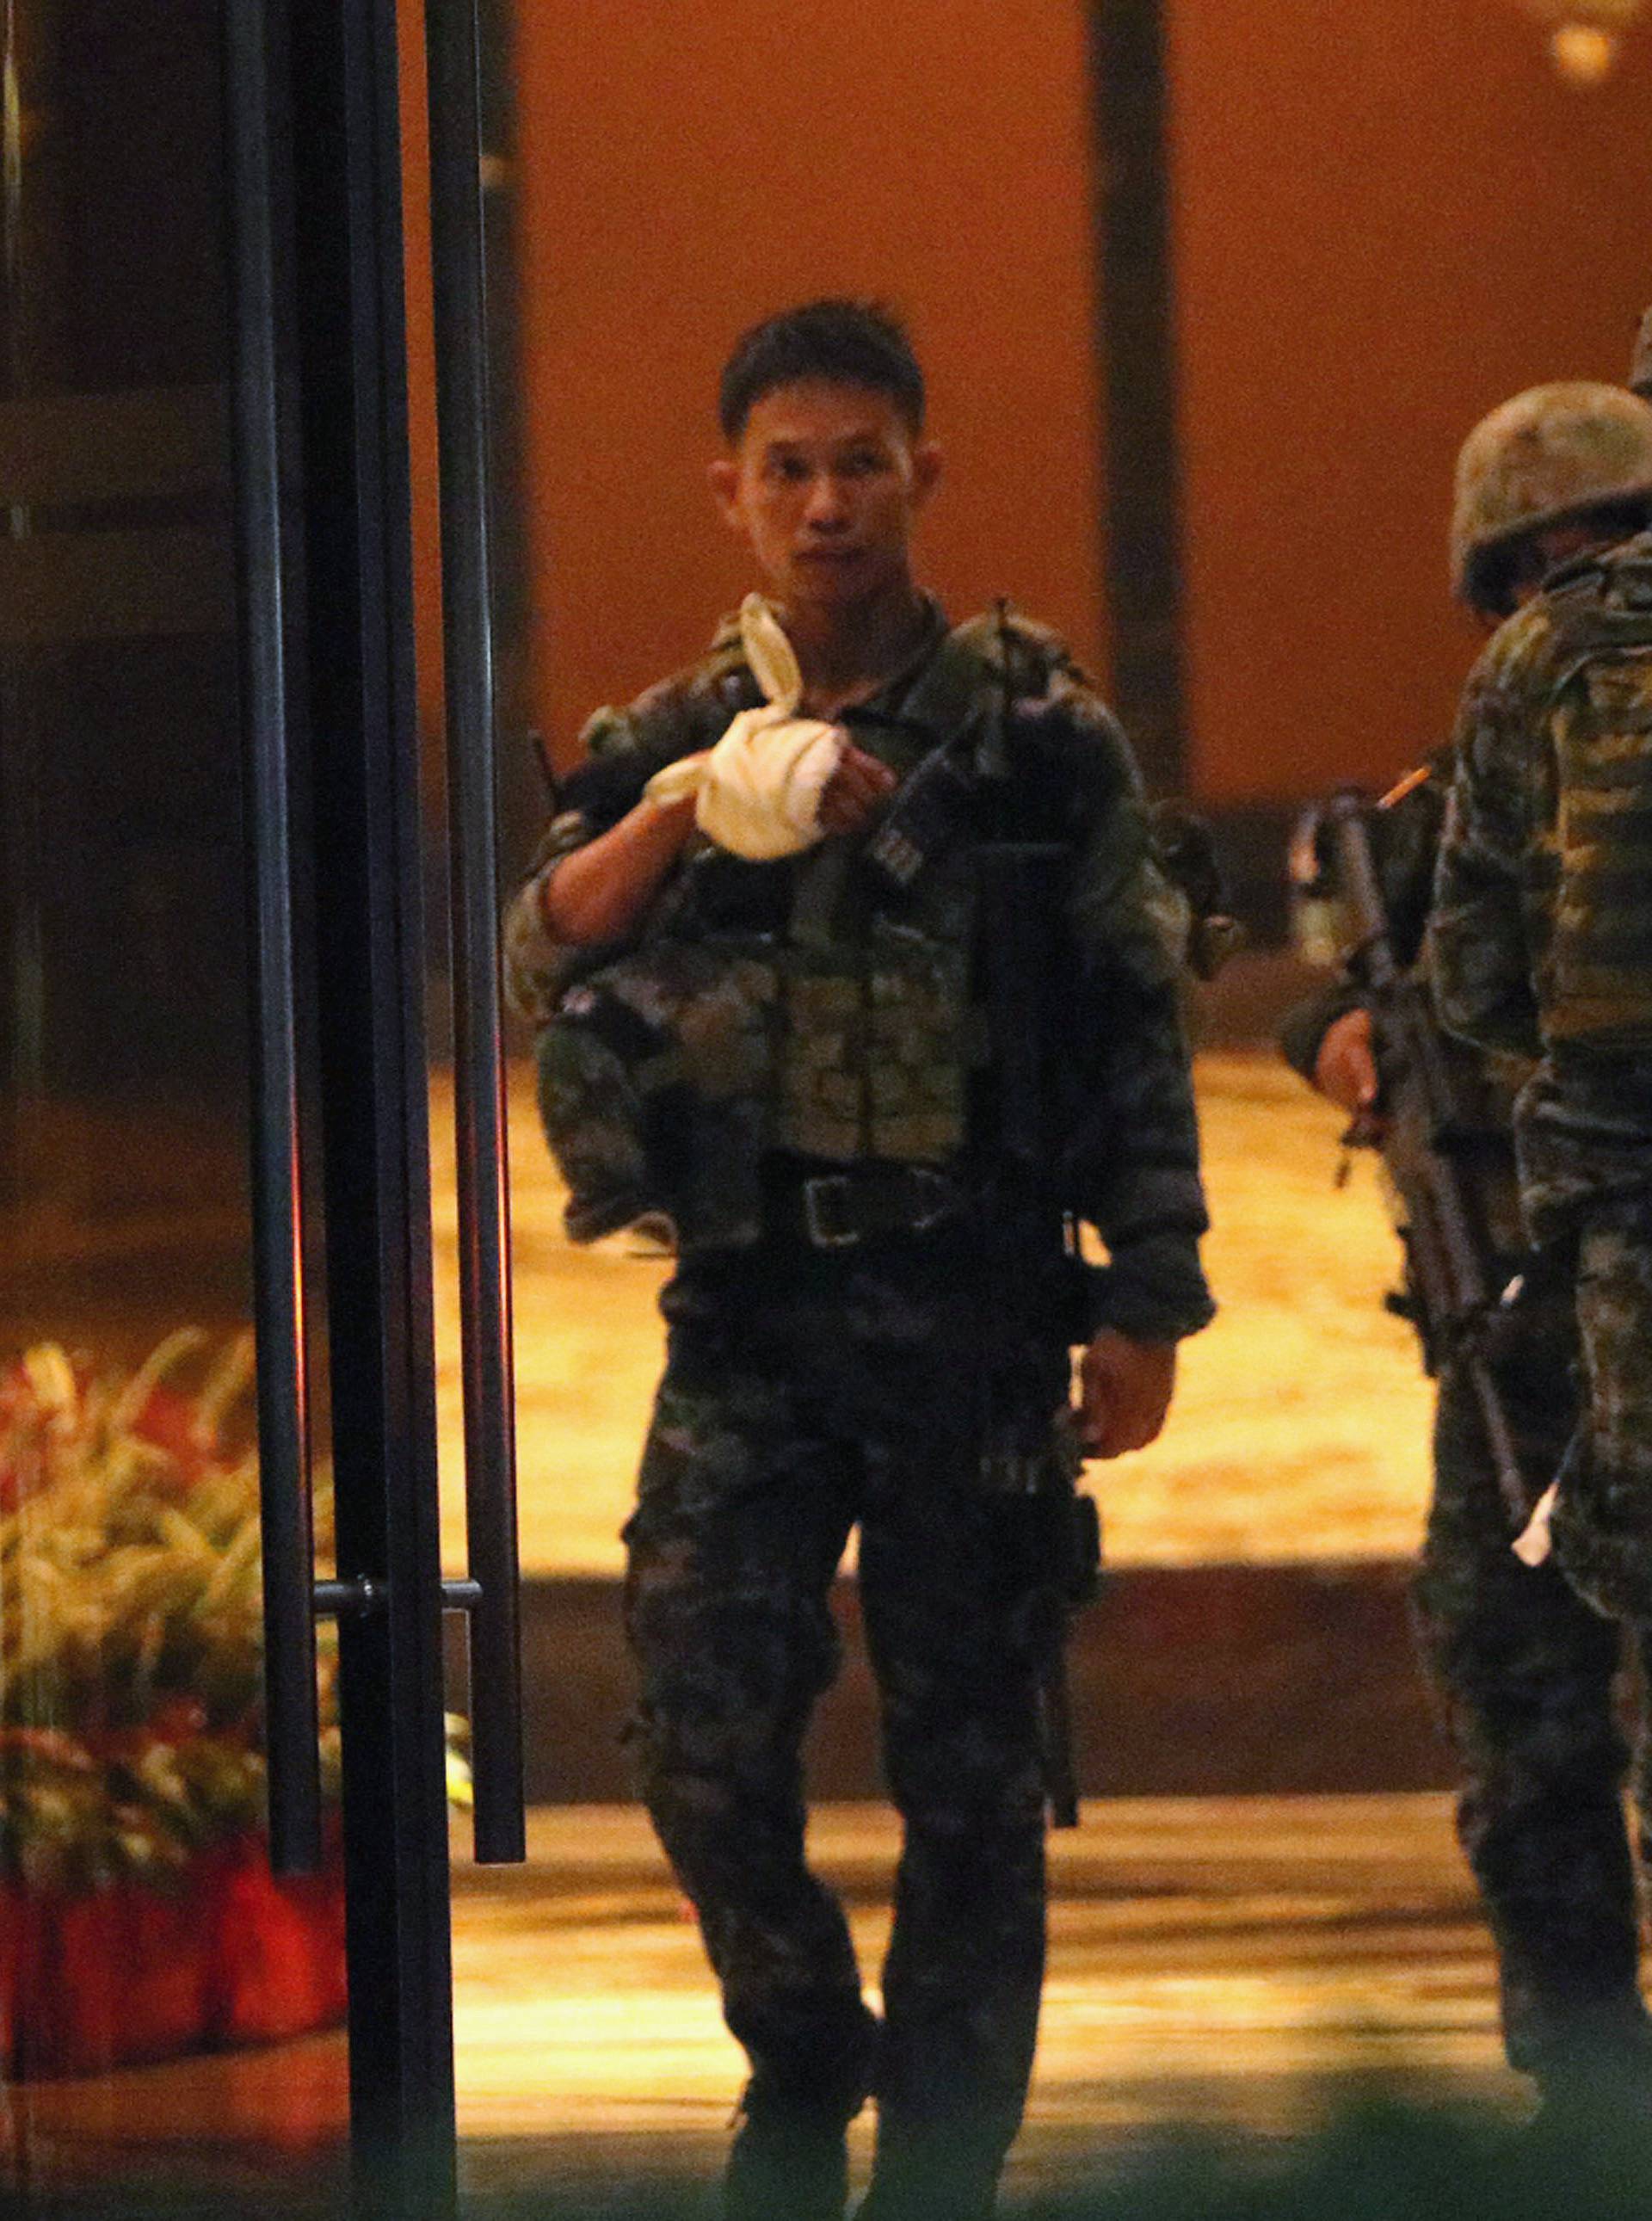 A injured policeman is seen at the entrance of a hotel after a shooting incident inside Resorts World Manila in Pasay City, Metro Manila